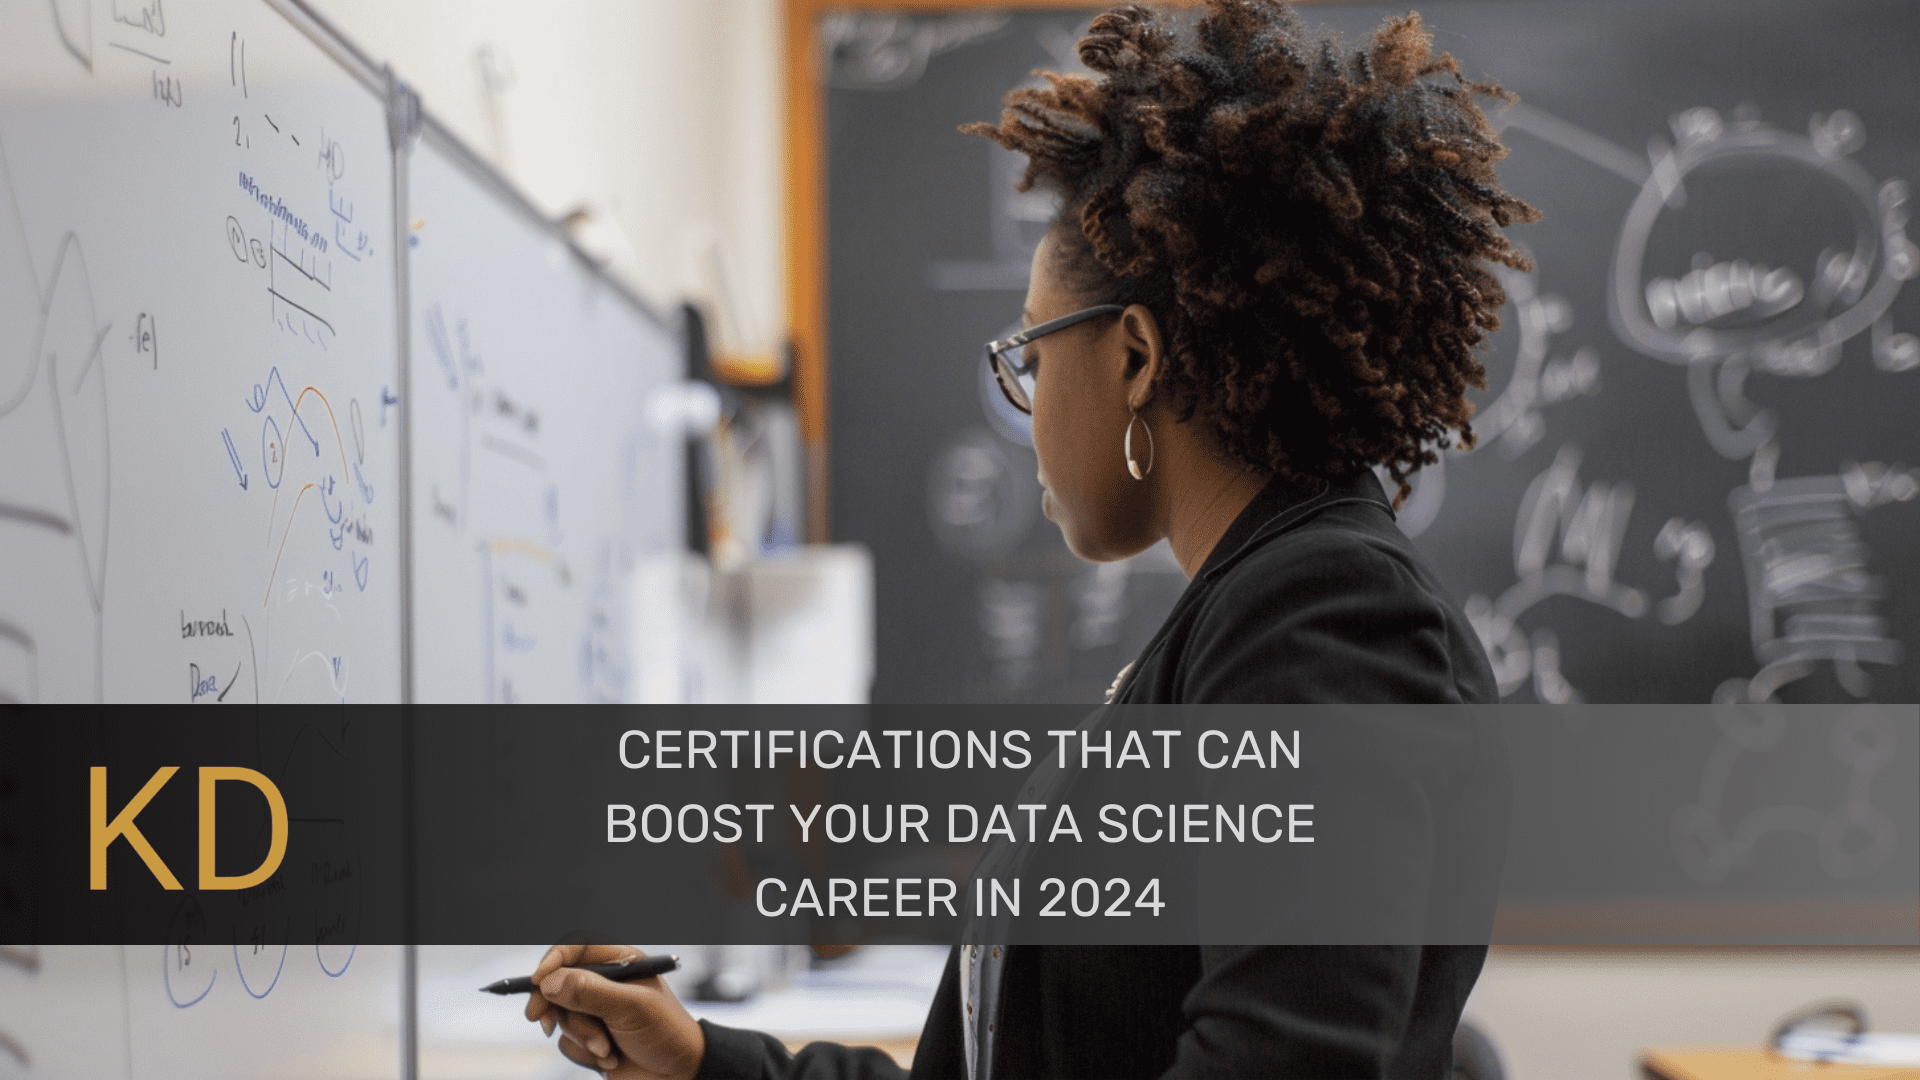 Certifications That Can Boost Your Data Science Career in 2024